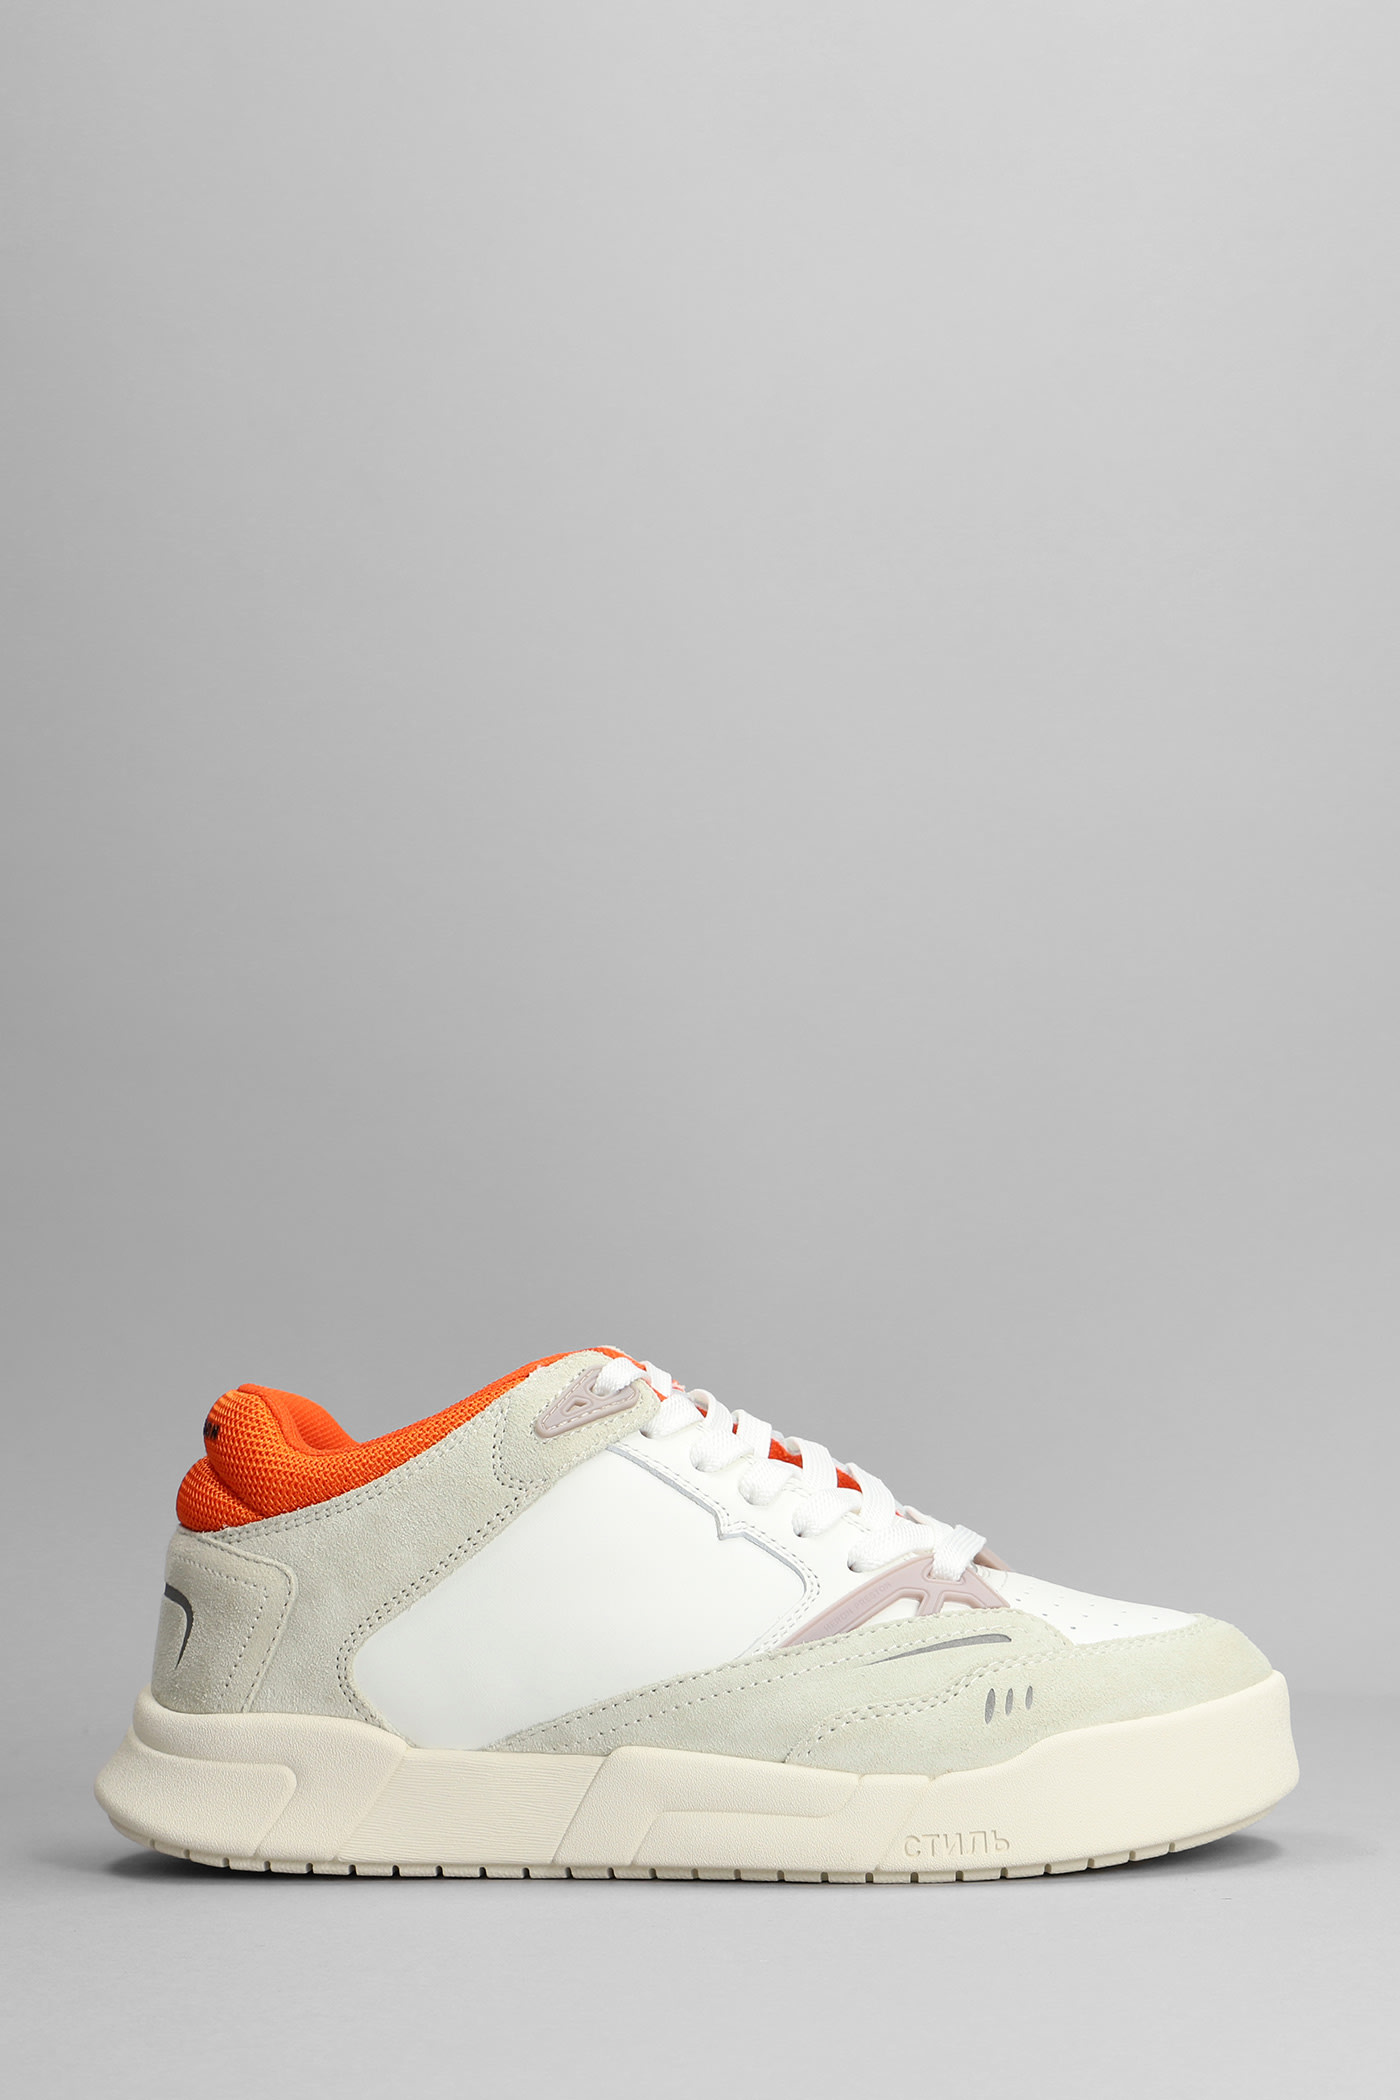 HERON PRESTON SNEAKERS IN WHITE SUEDE AND LEATHER